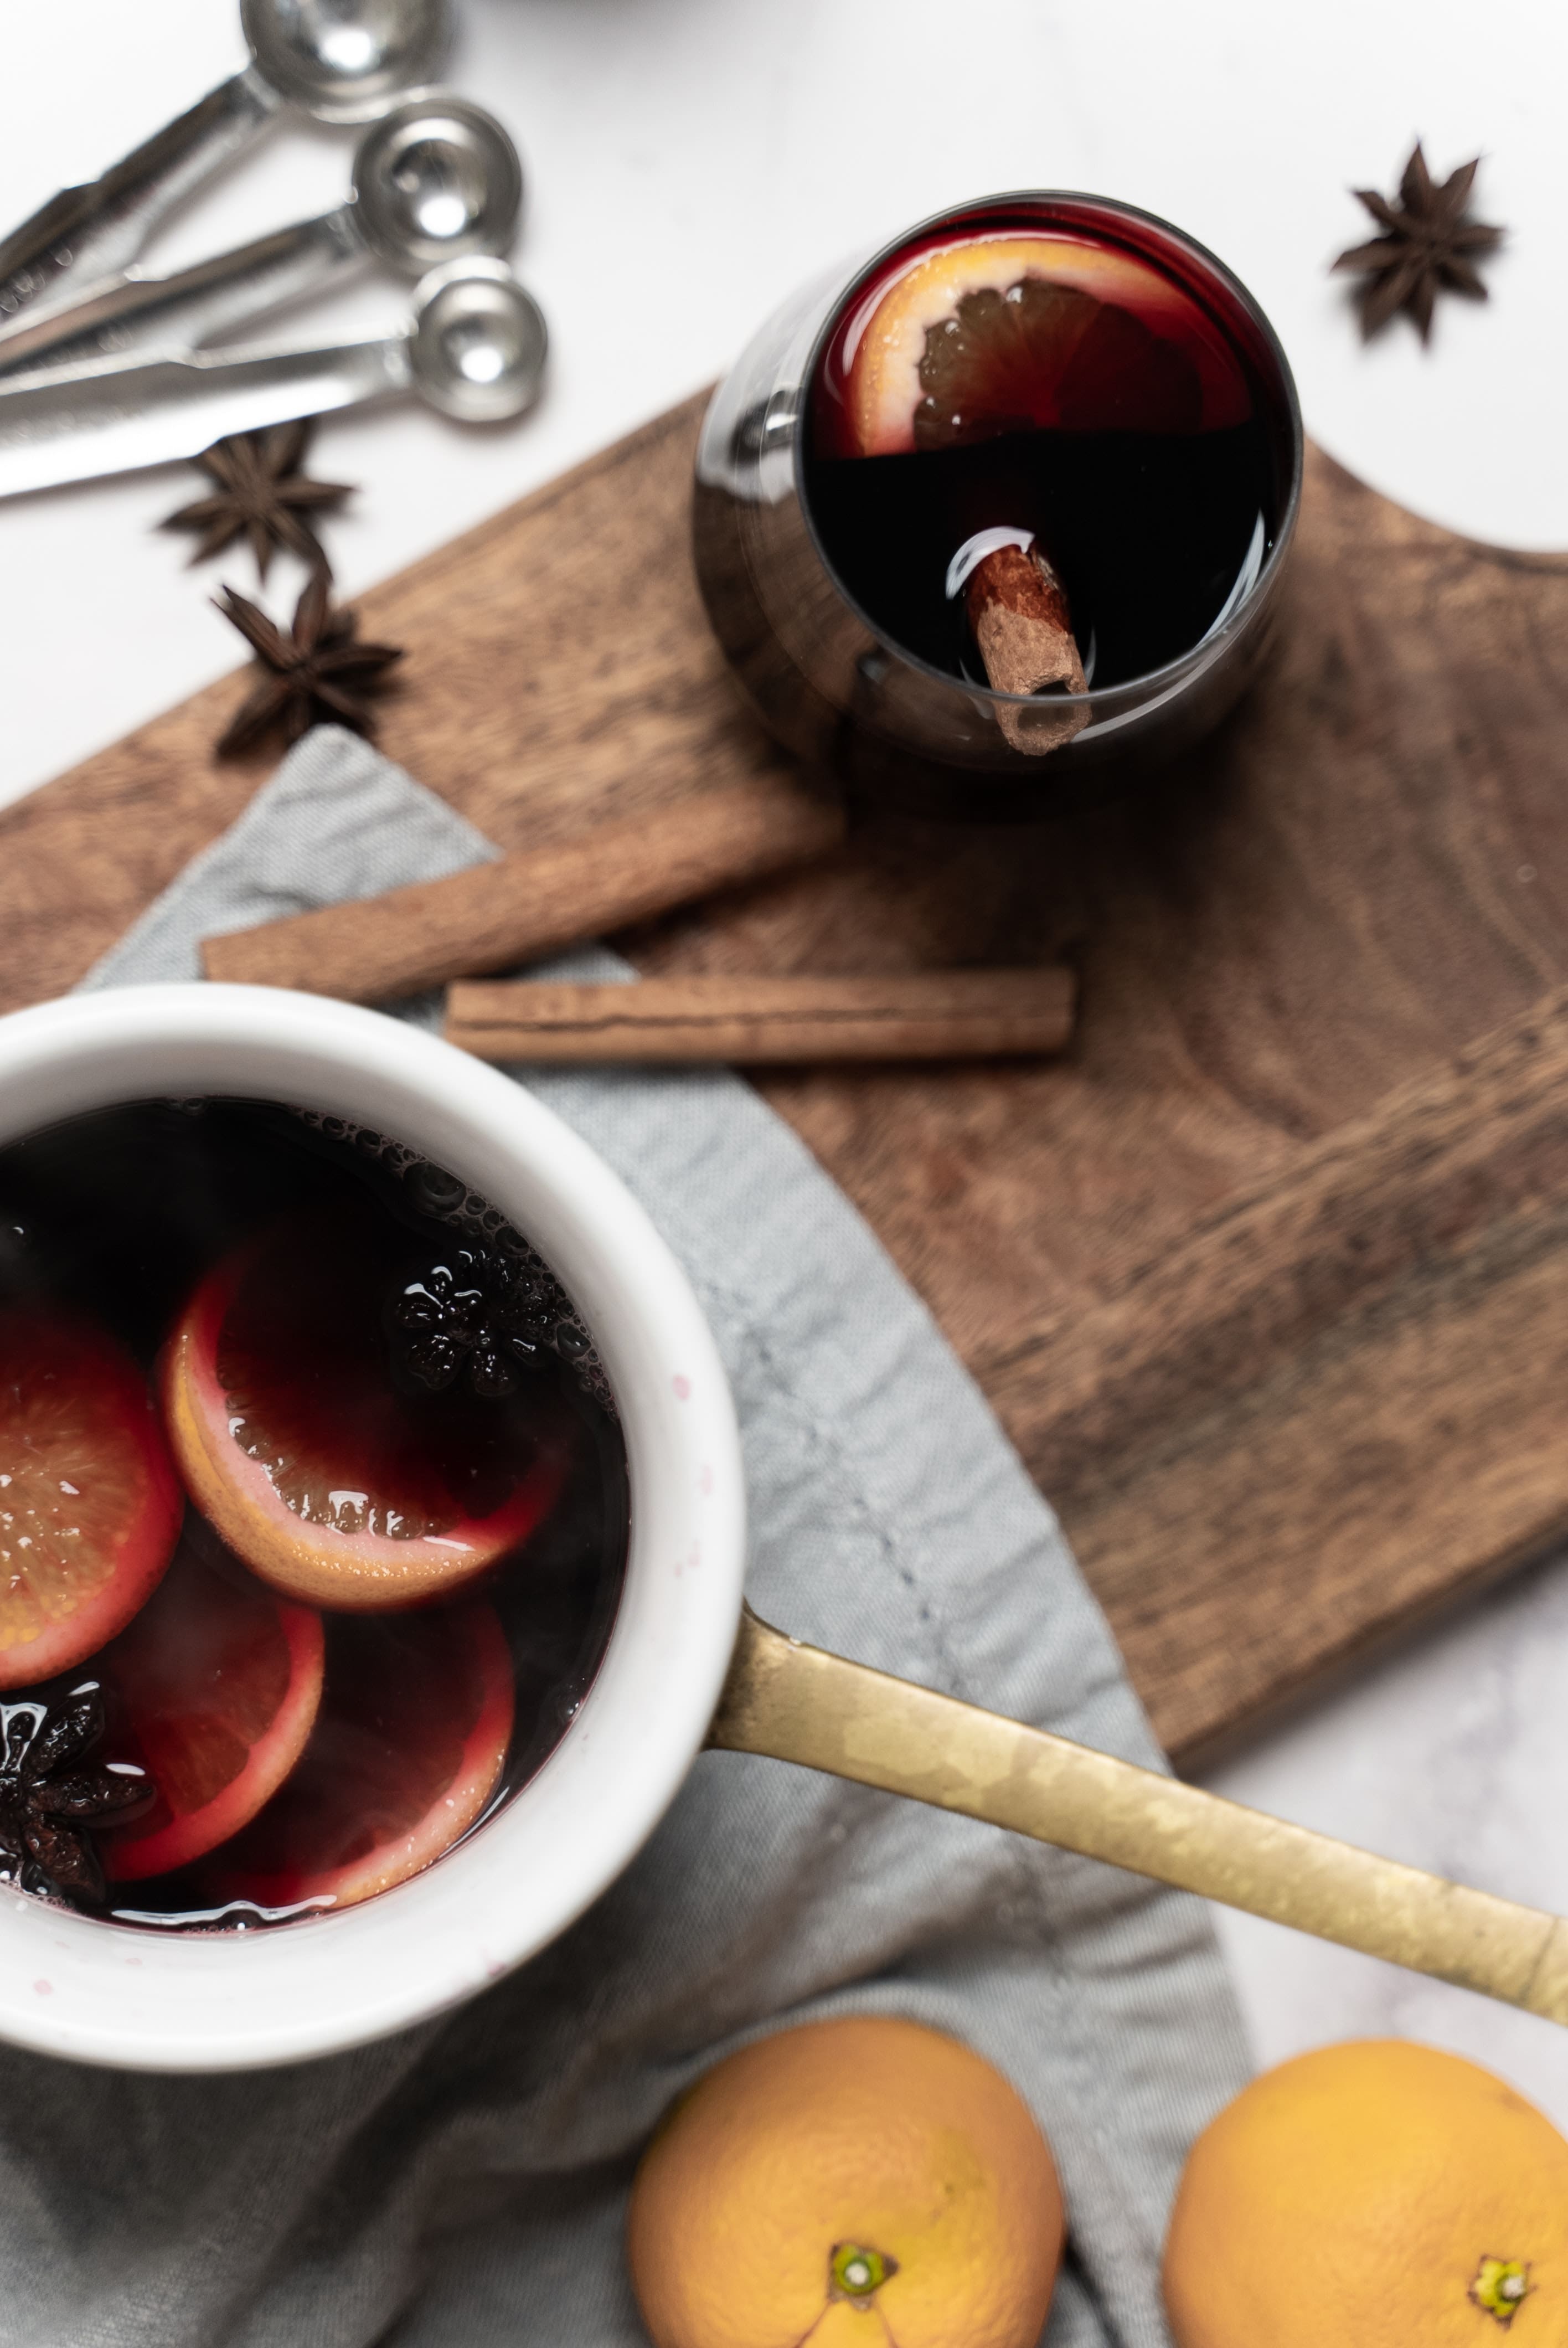 An image of home made mulled wine made with festive seasoning and spices.